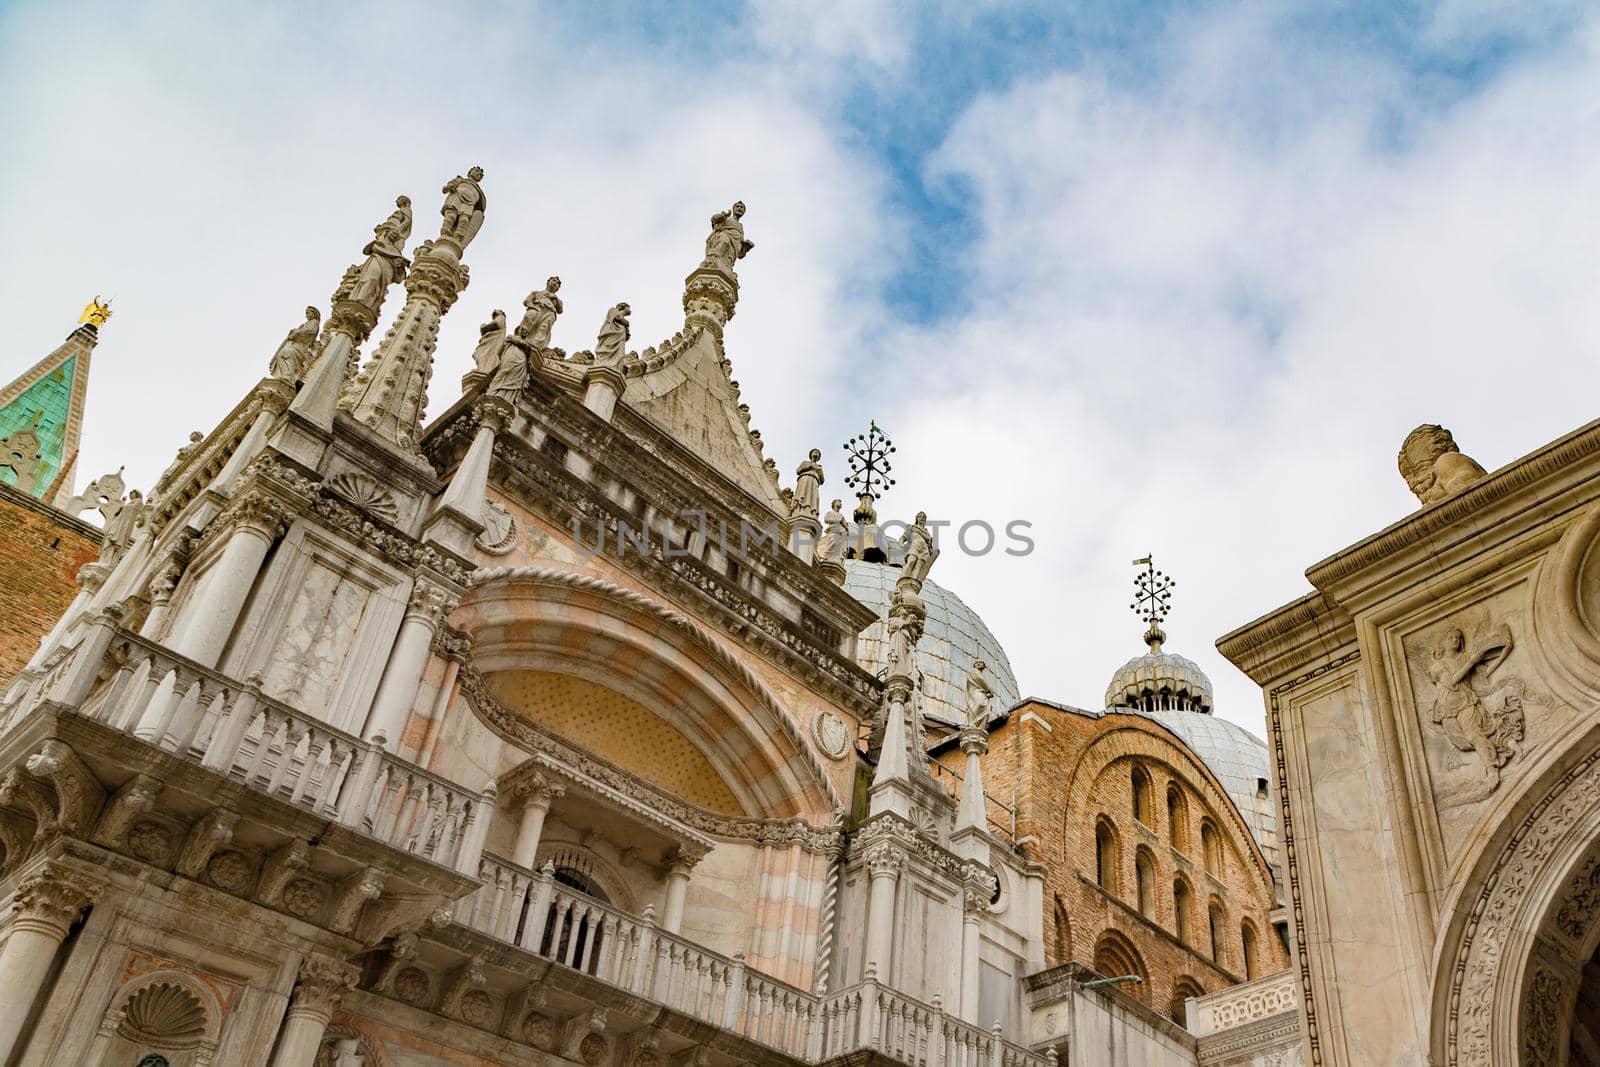 Piazza San Marco in Venice, bottom view. Basilica San Marco, Venice, Italy. Cathedral of San Marco (San Marco basilica) in Venice, Italy. Architecture postcard background.